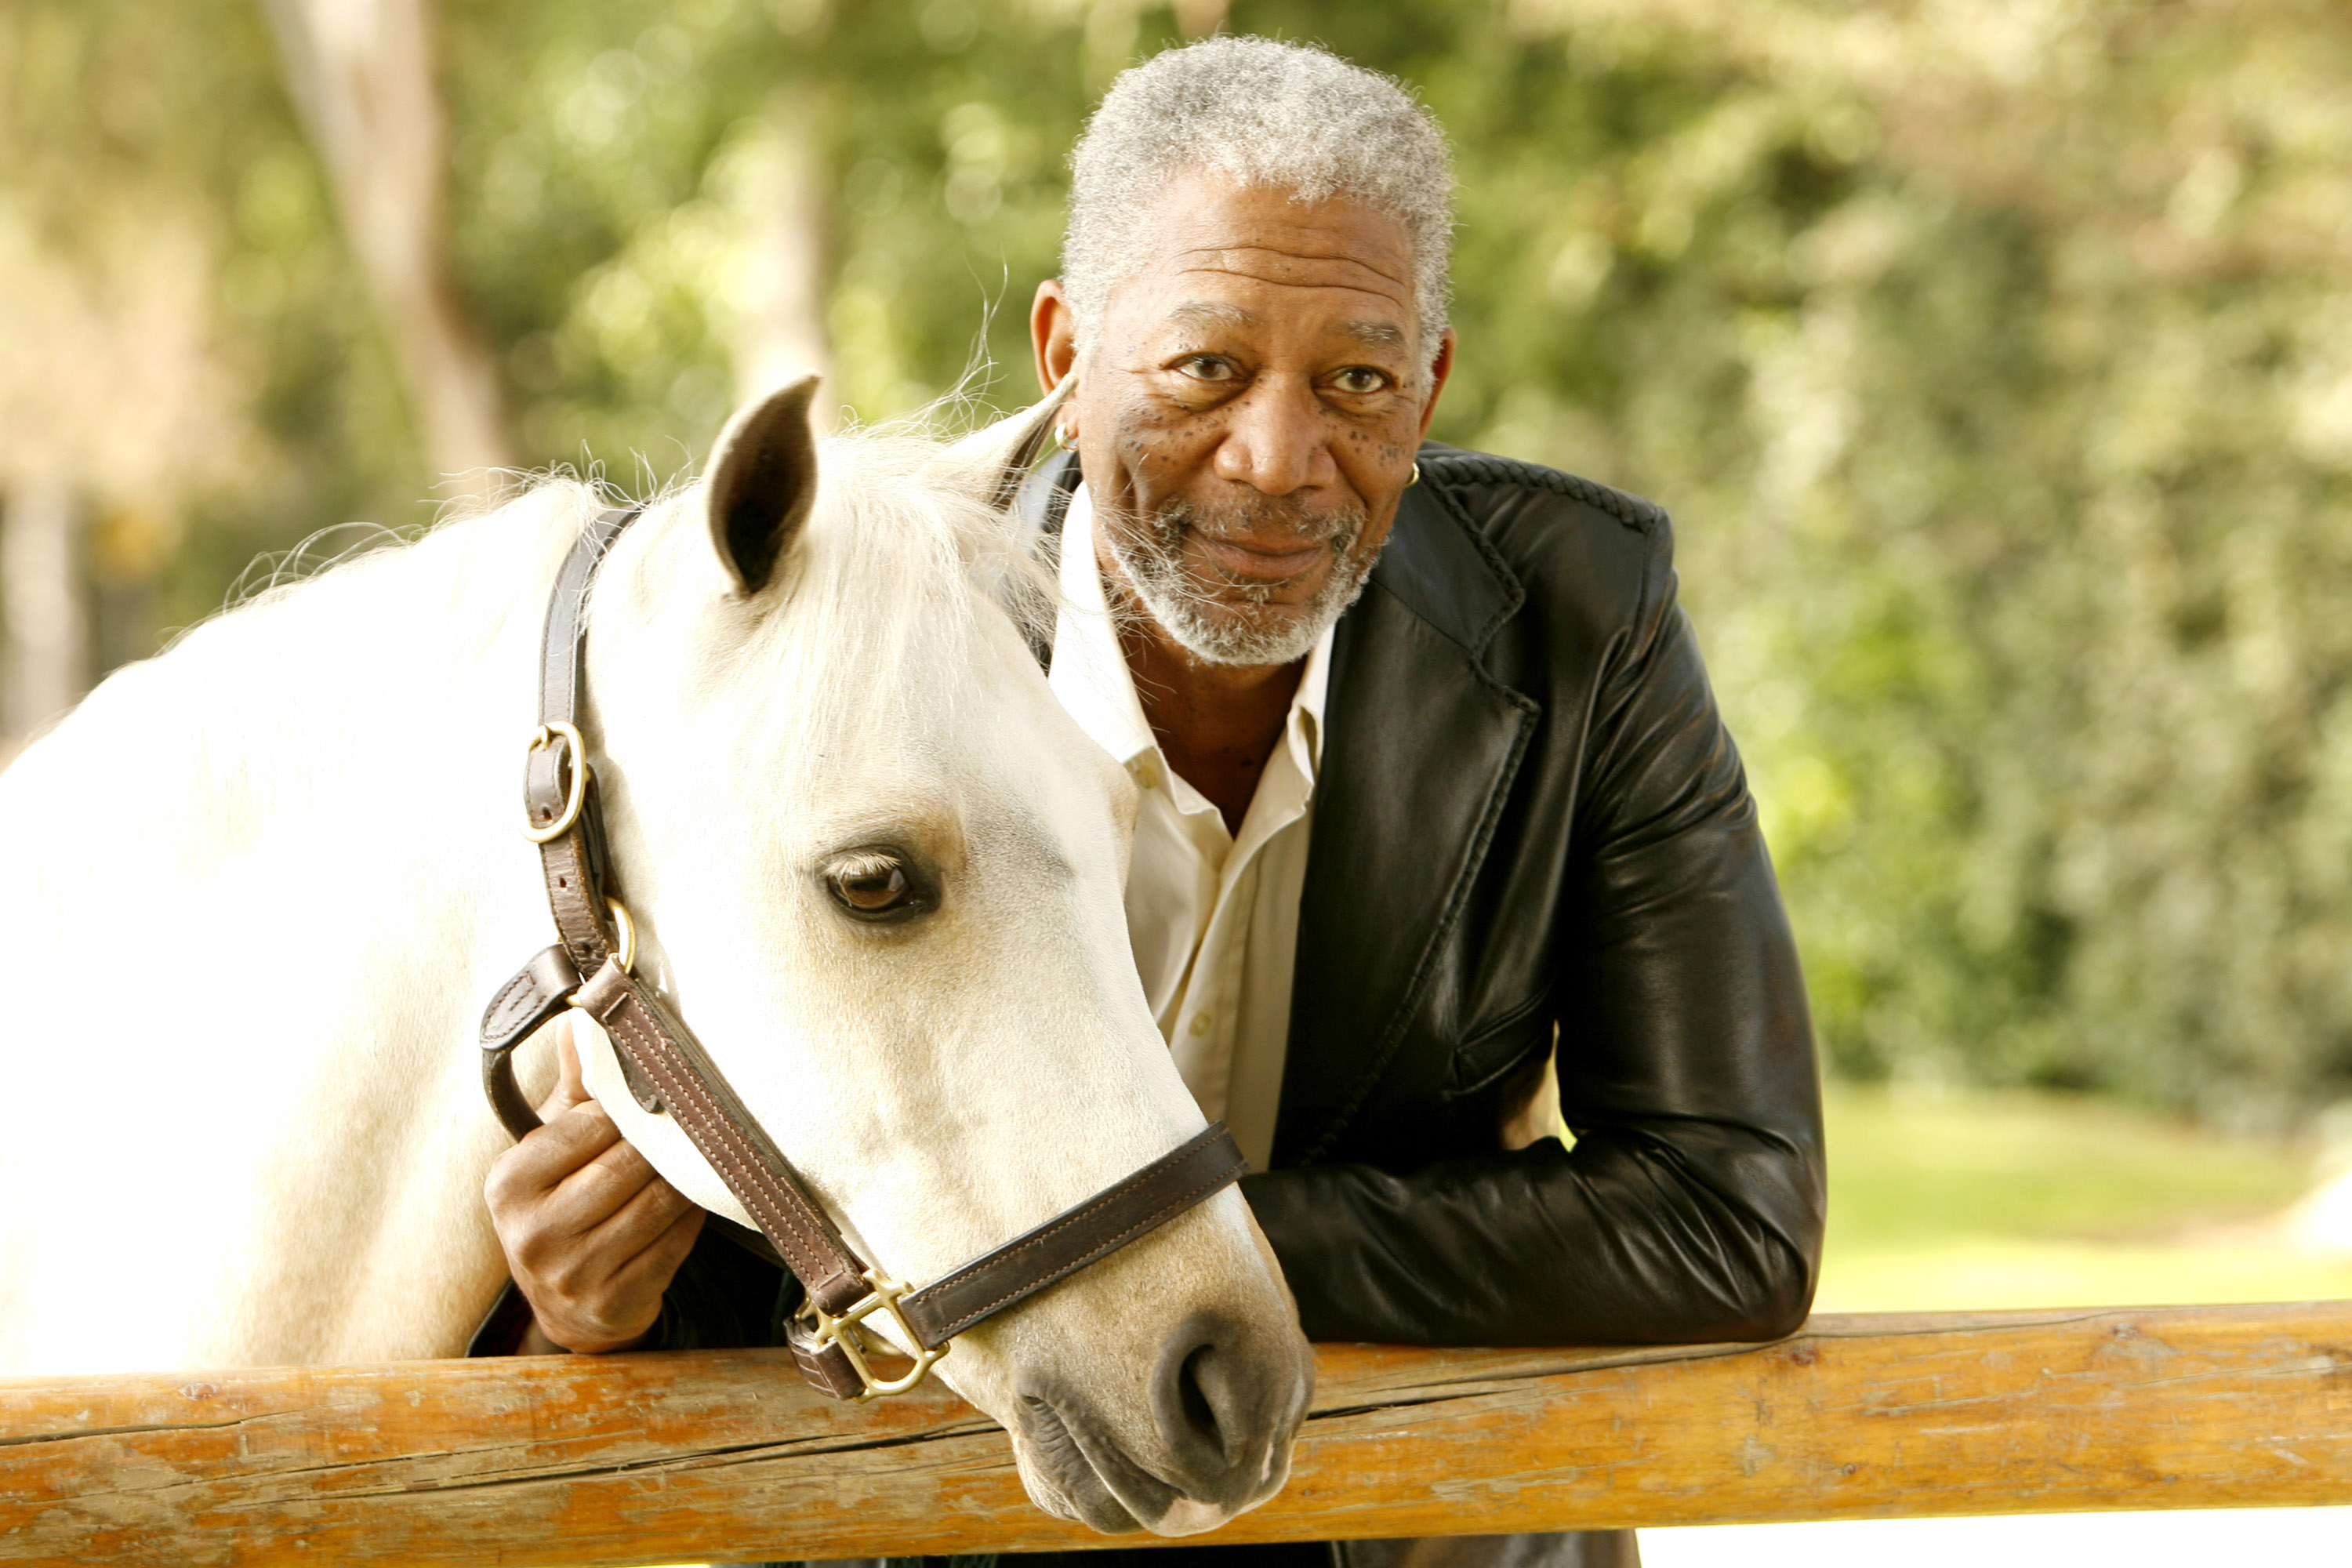 Morgan Freeman at a cover photo shoot for the fall edition of the Luxury Equestrian Lifestyle Magazine "Show Circuit" on October 8, 2006 | Source: Getty Images